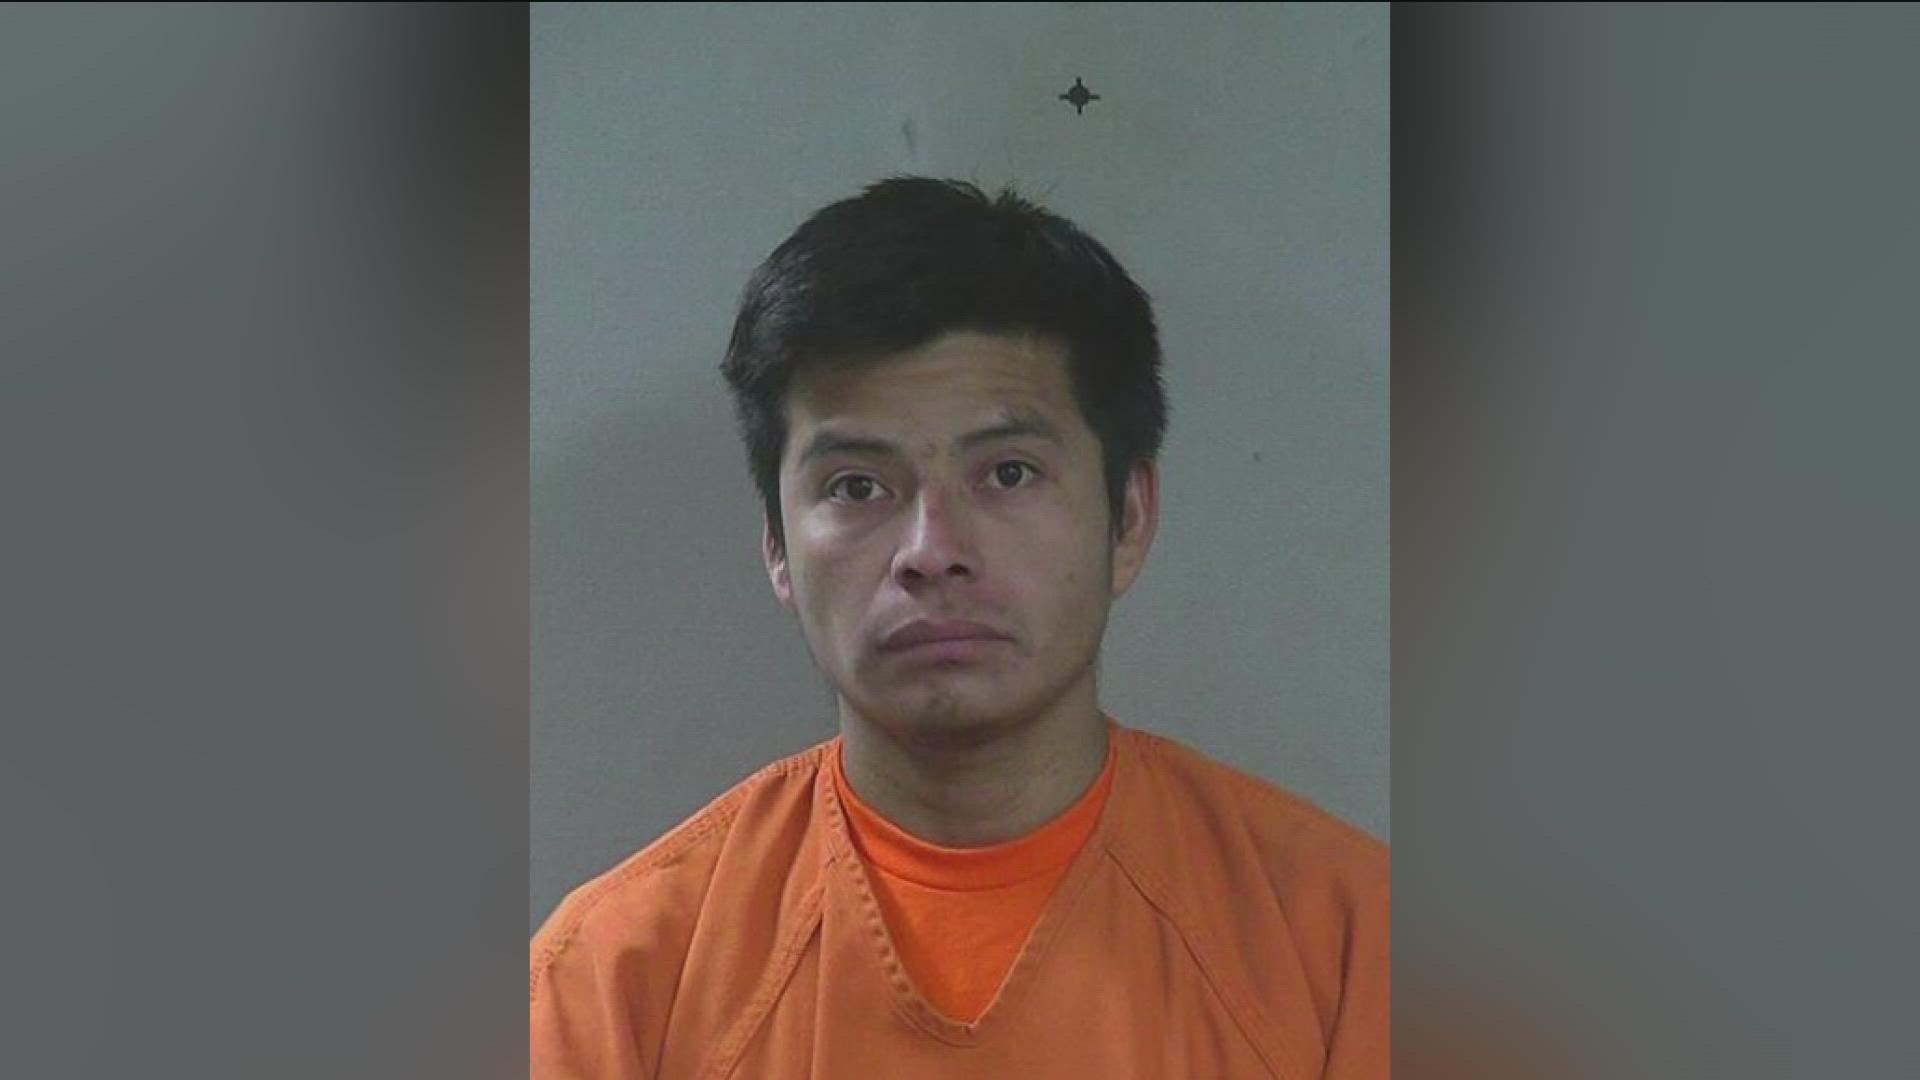 Justino Morales Ramos was booked into the Canyon County Jail early Wednesday morning.